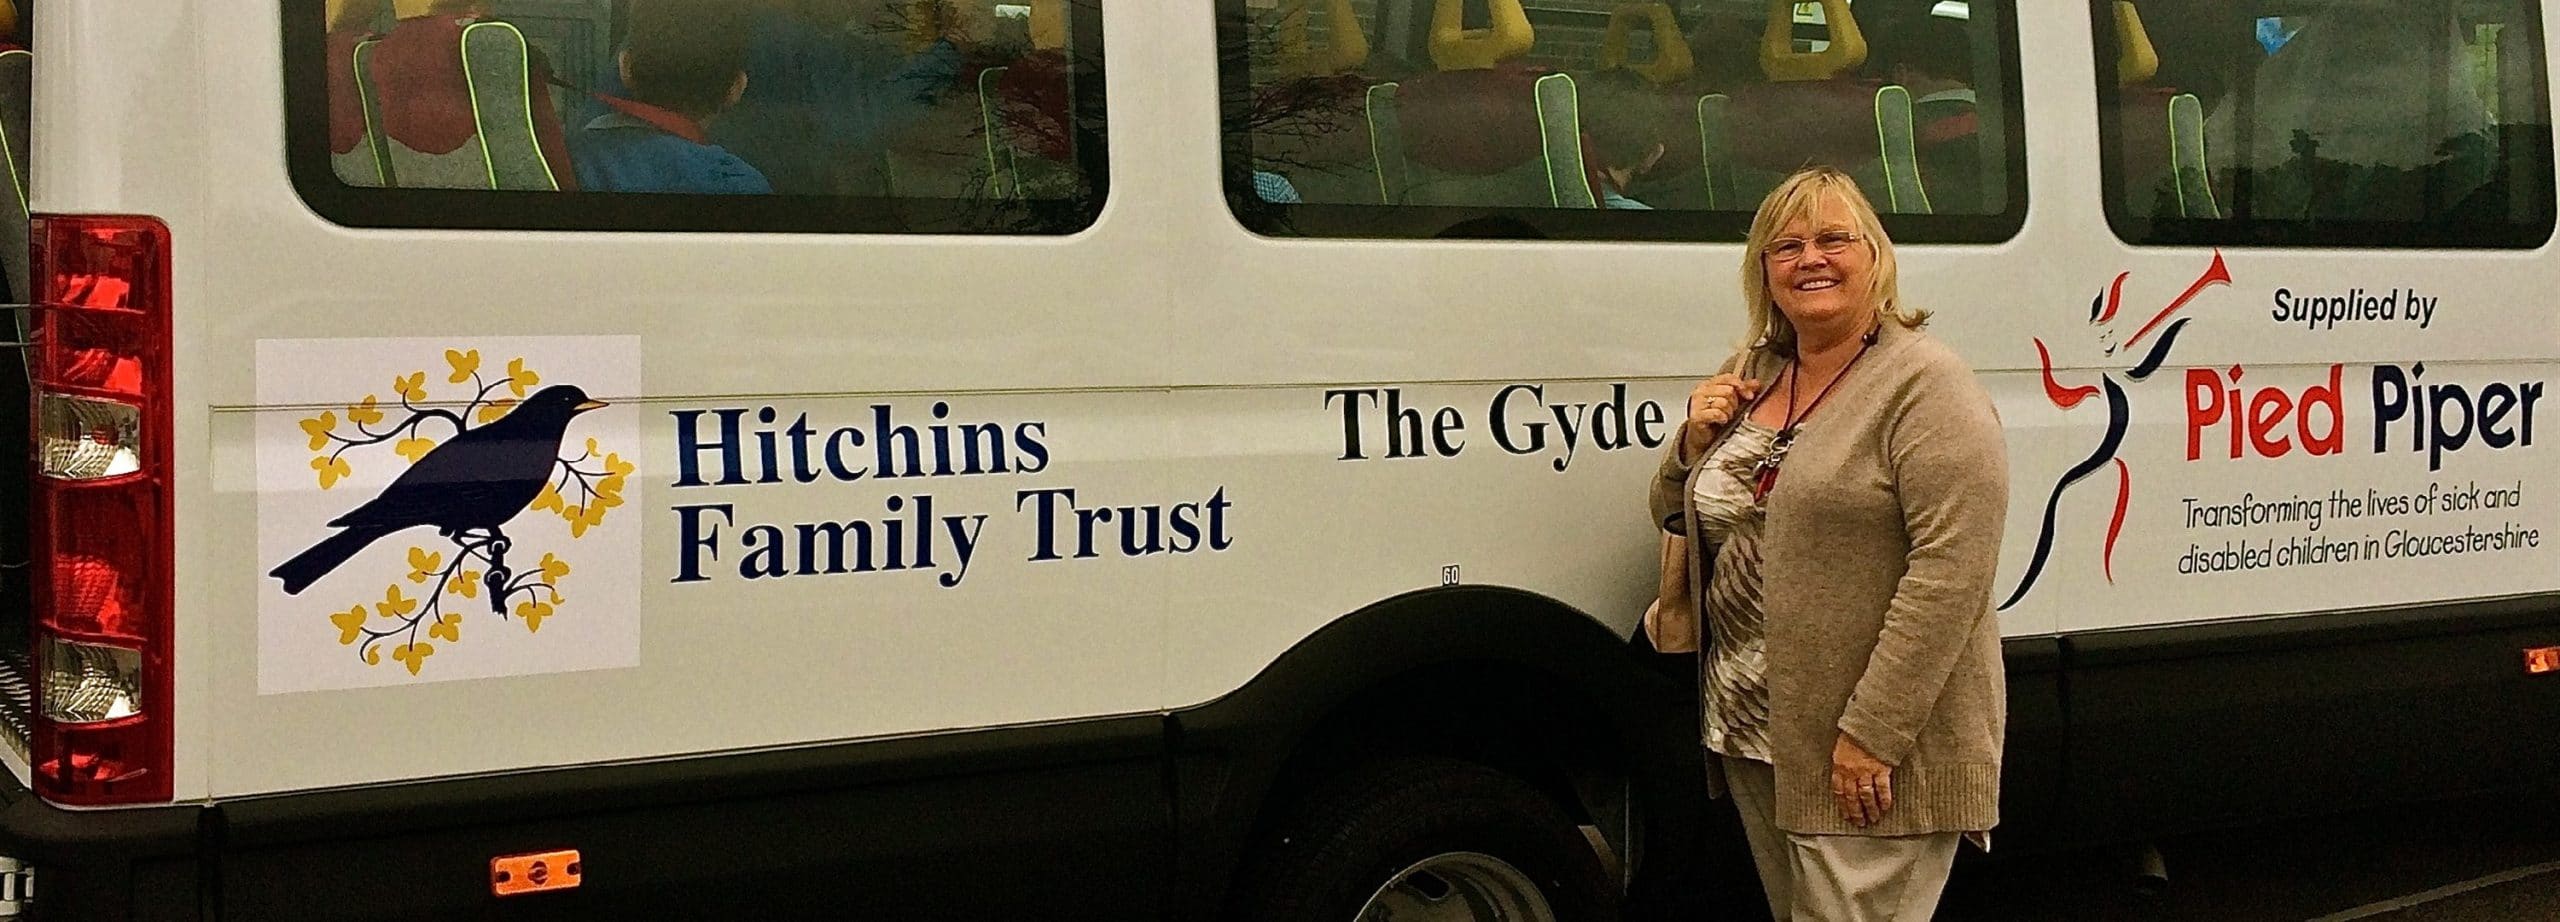 A woman is standing in front of a mini bus